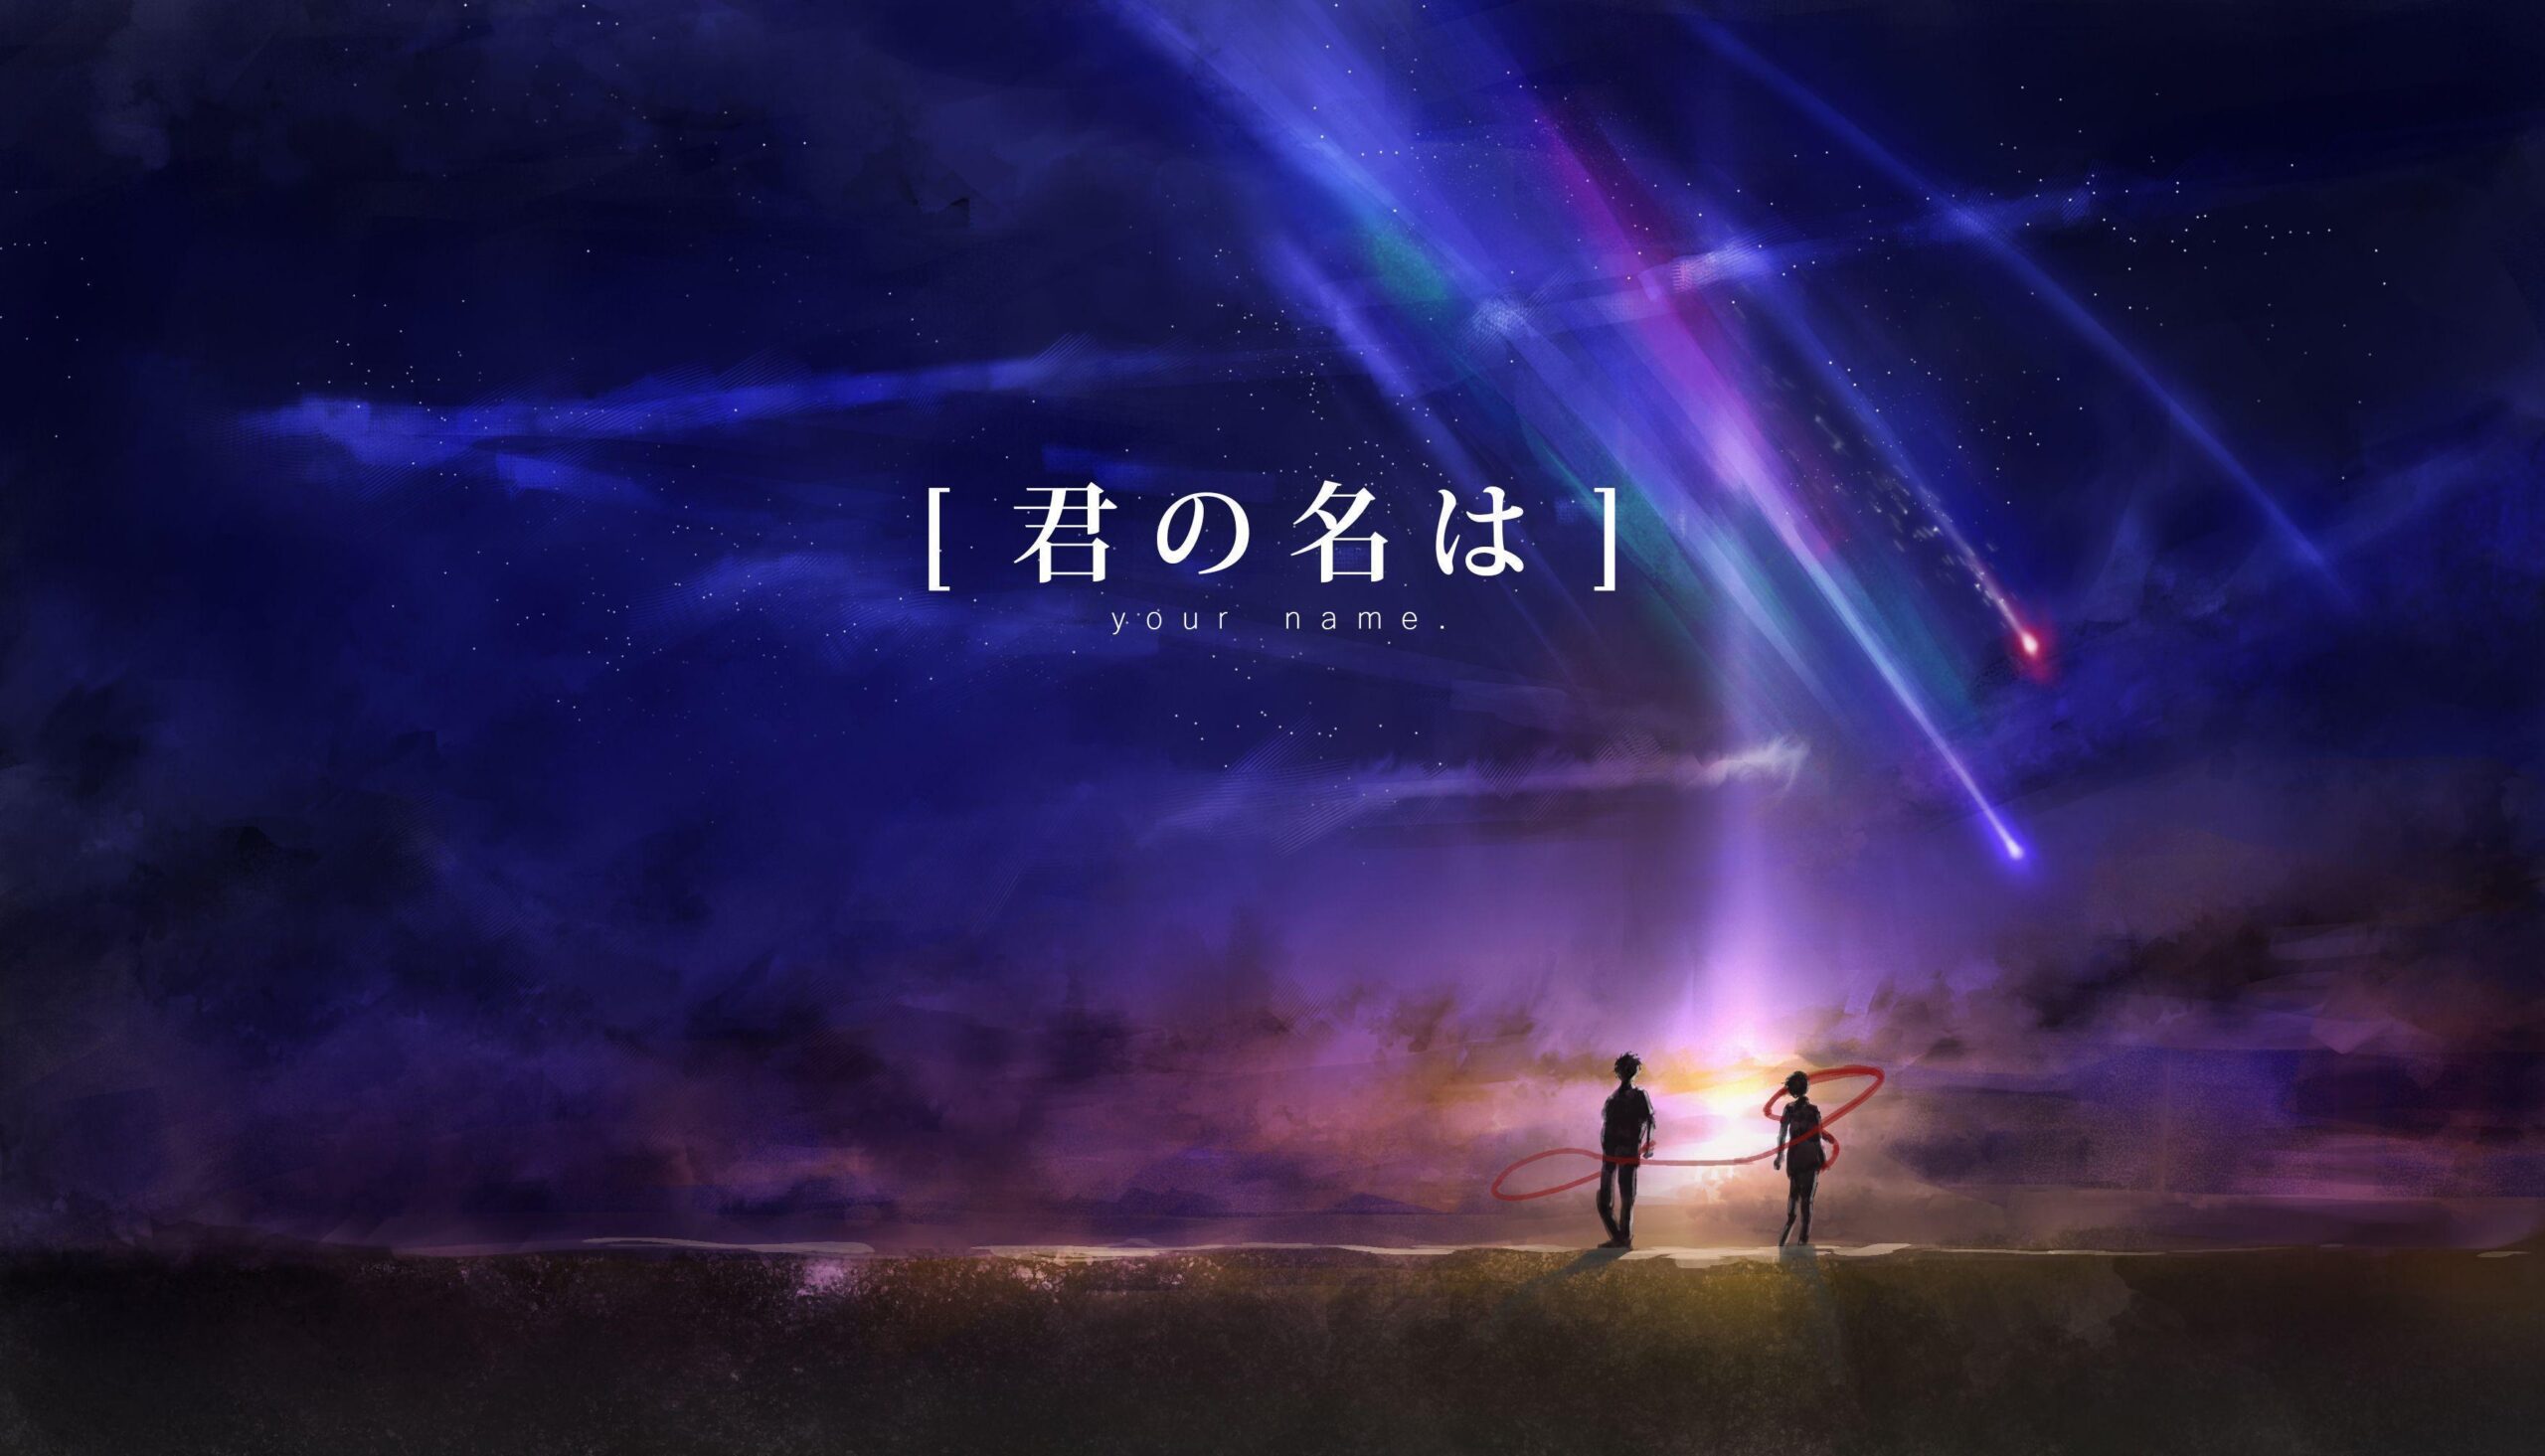 Your Name Download Wallpaper